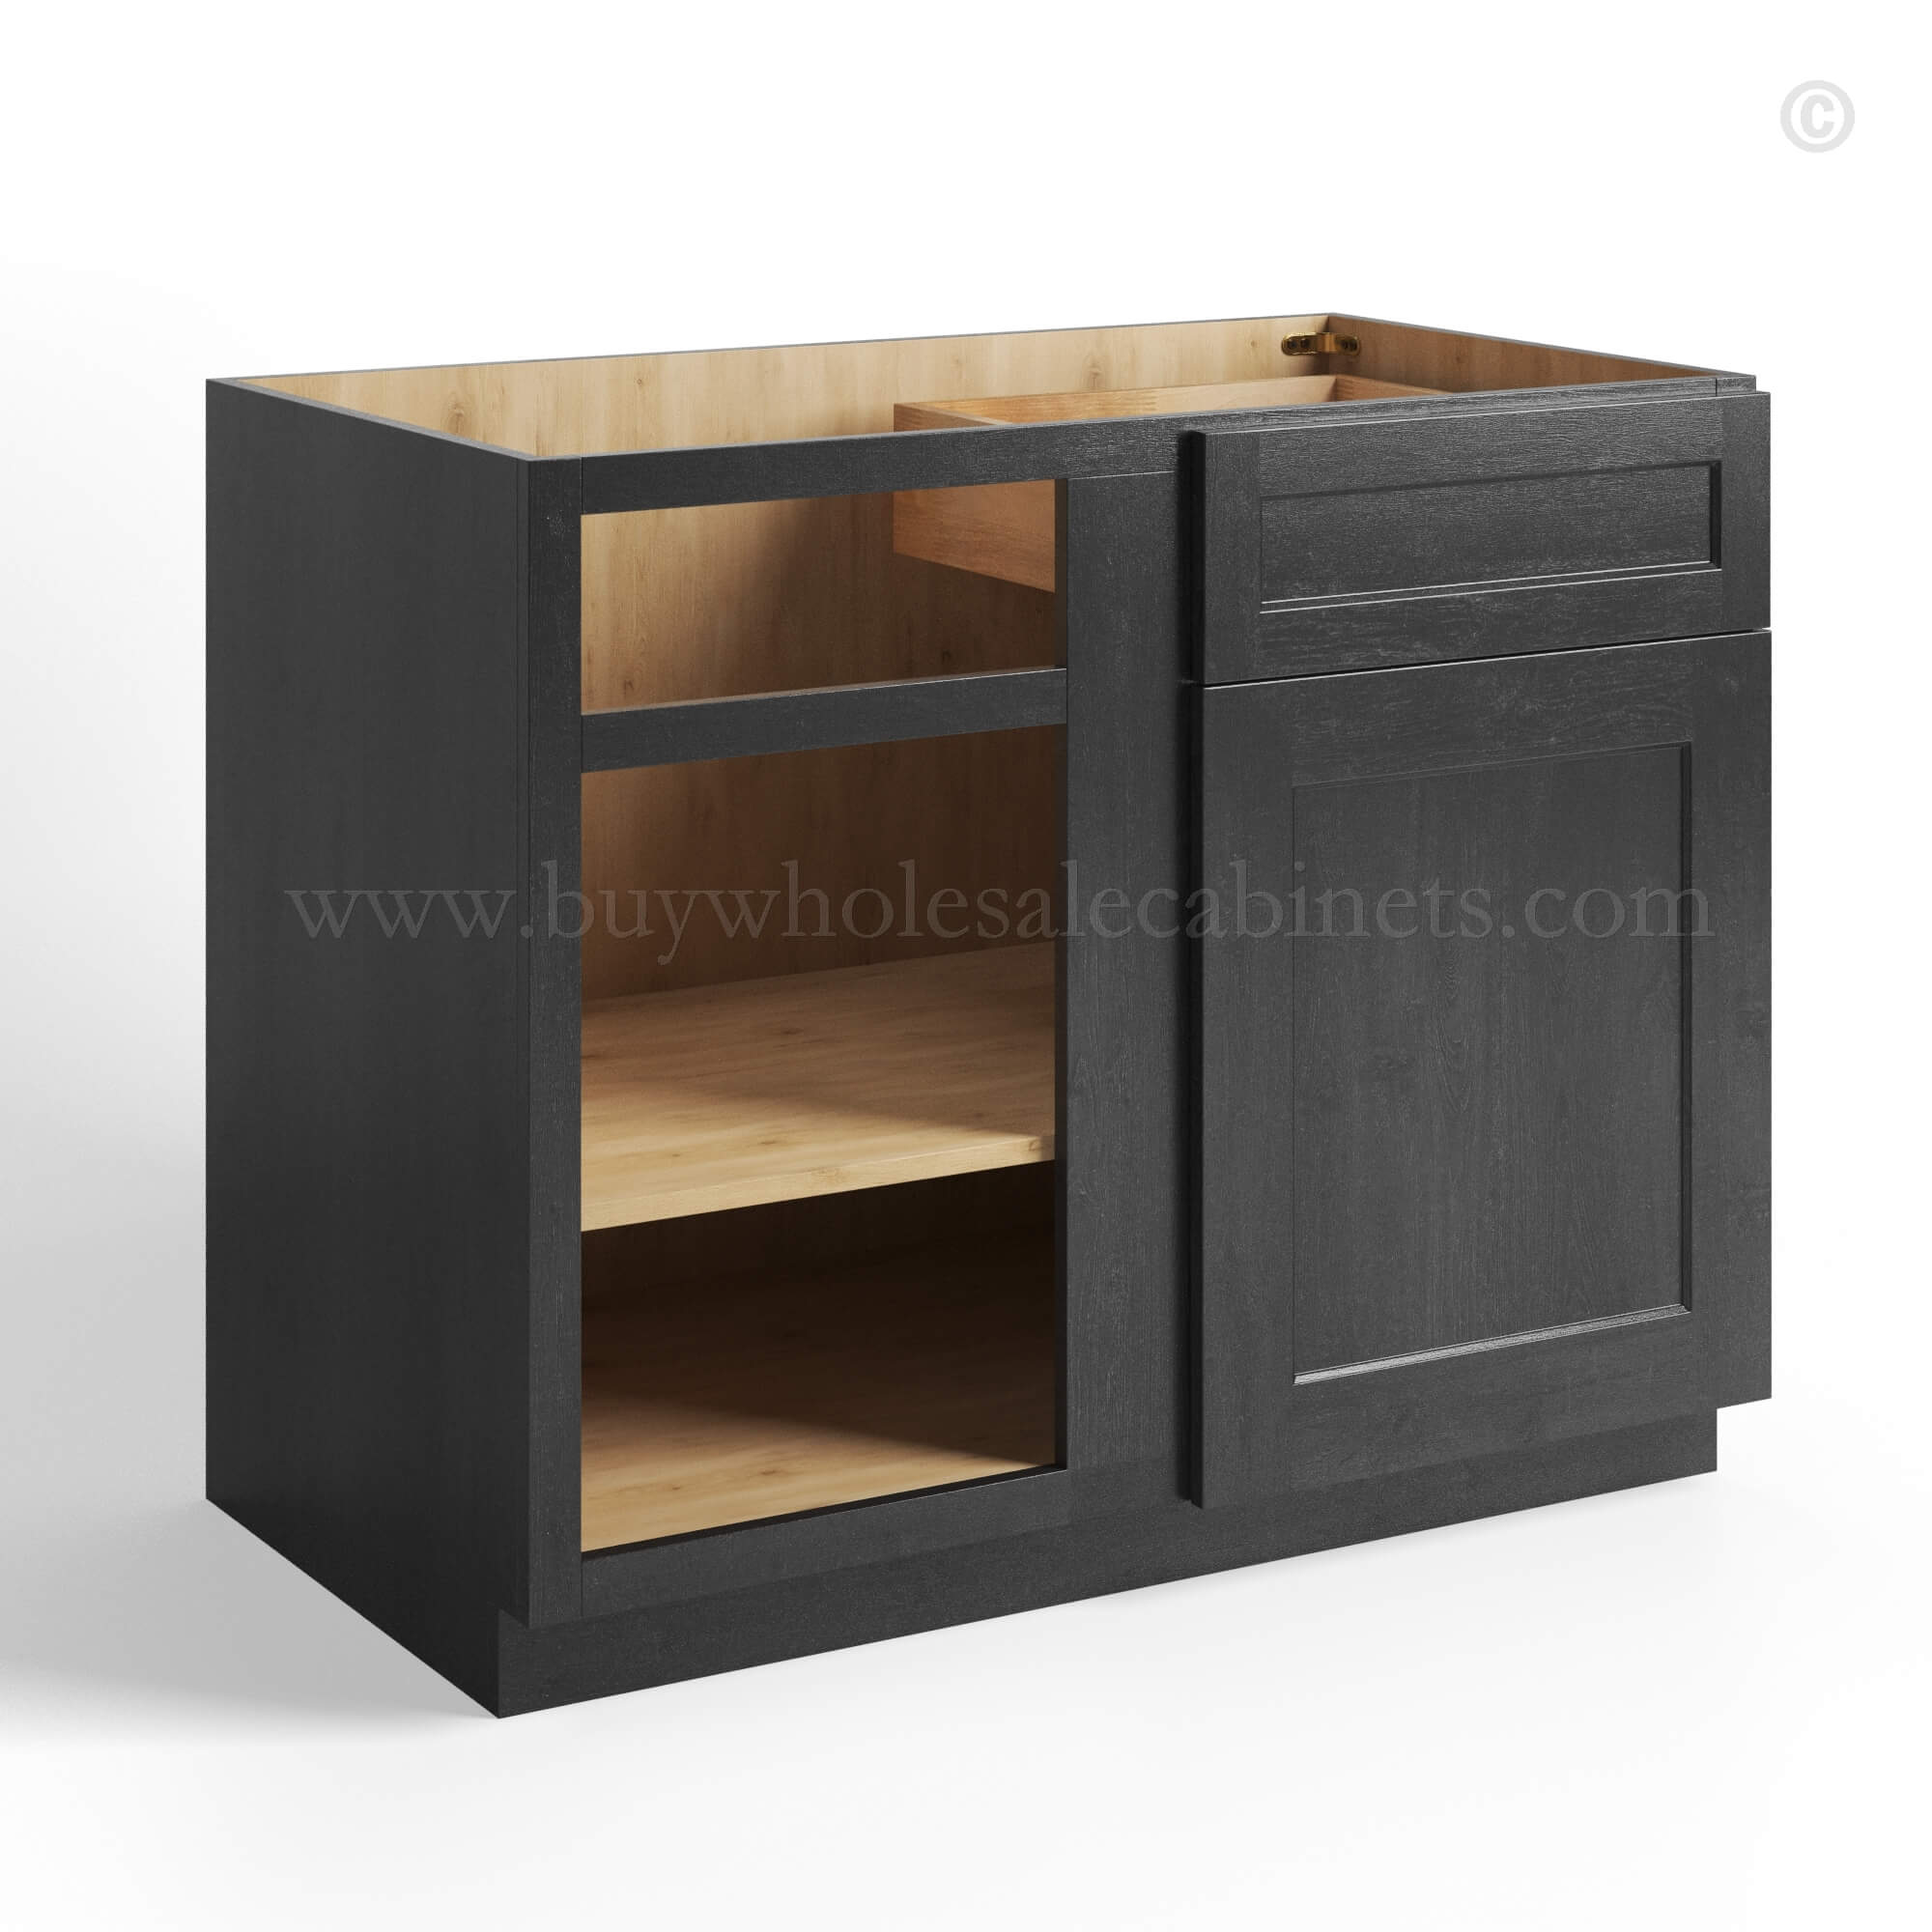 charcoal black shaker base blind corner cabinet with single door and drawer, rta cabinets, wholesale cabinets